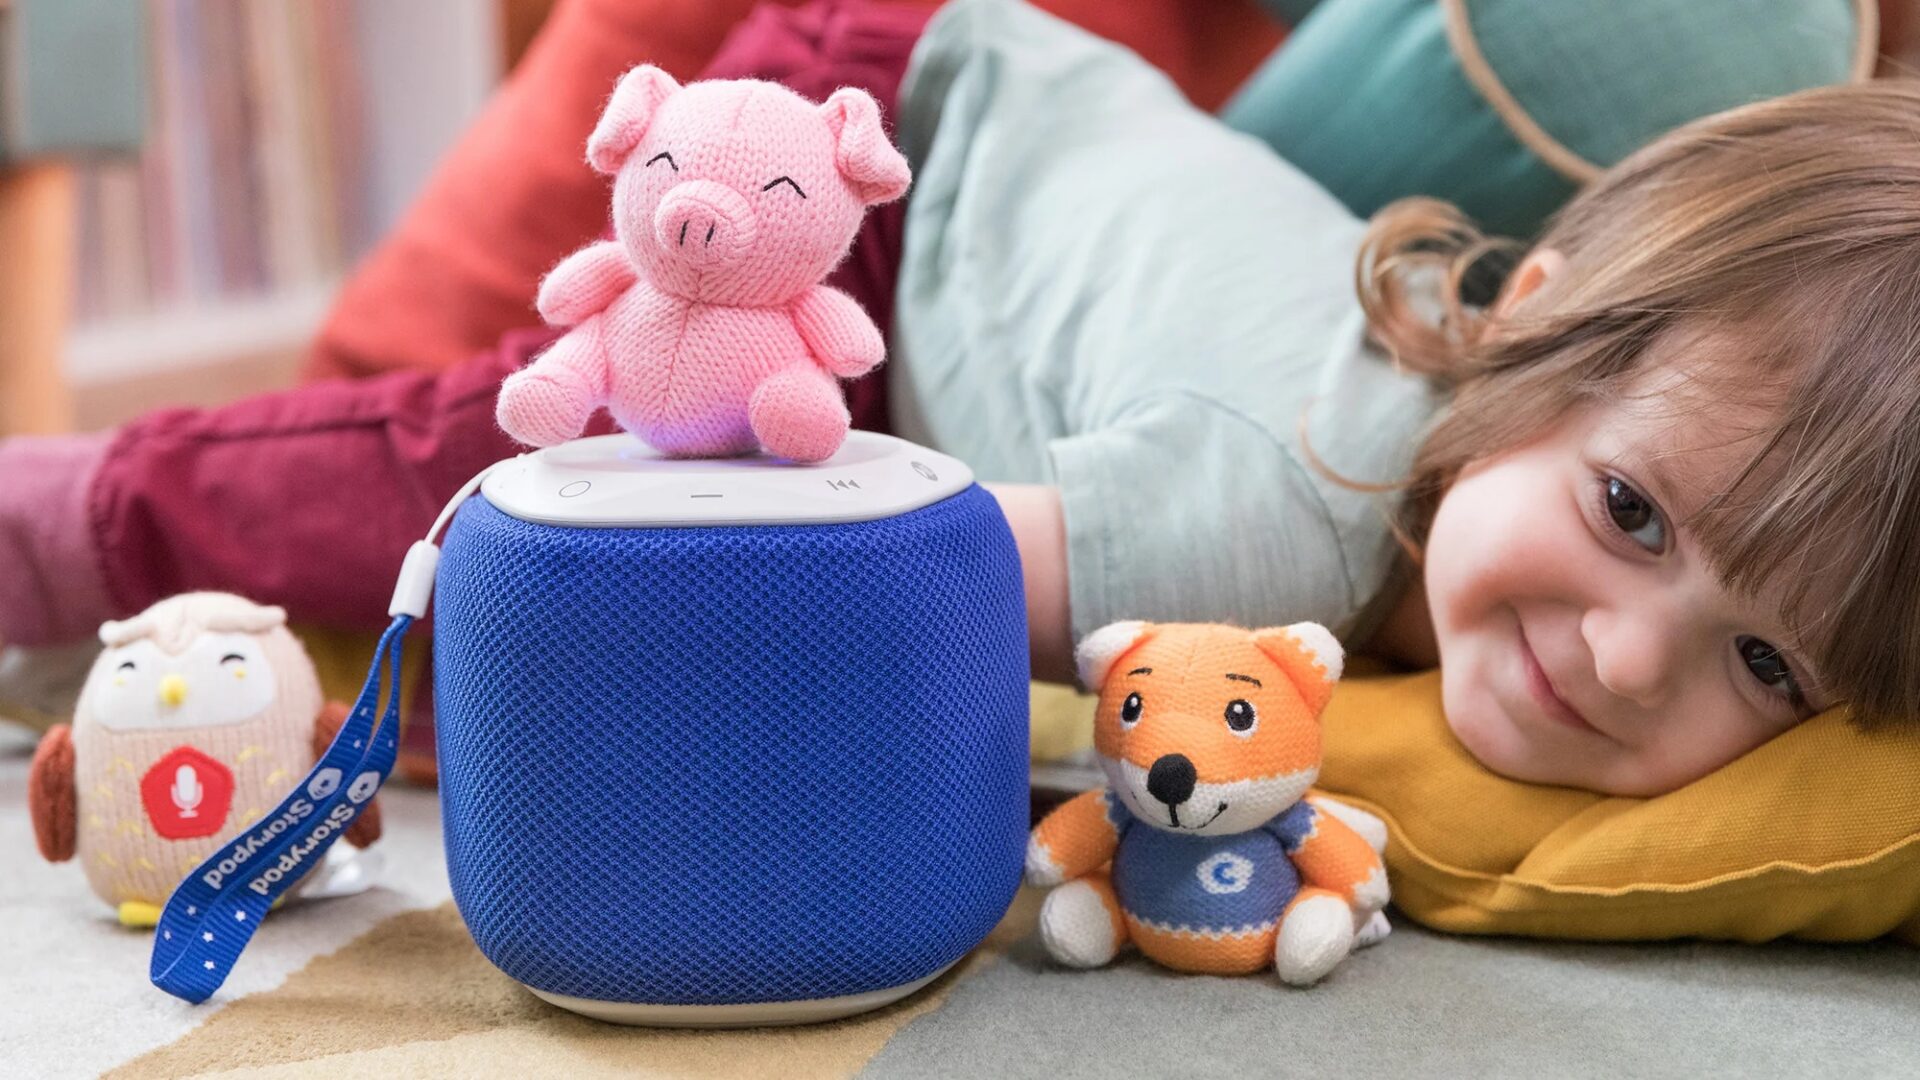 Go-to gadgets for kiddos